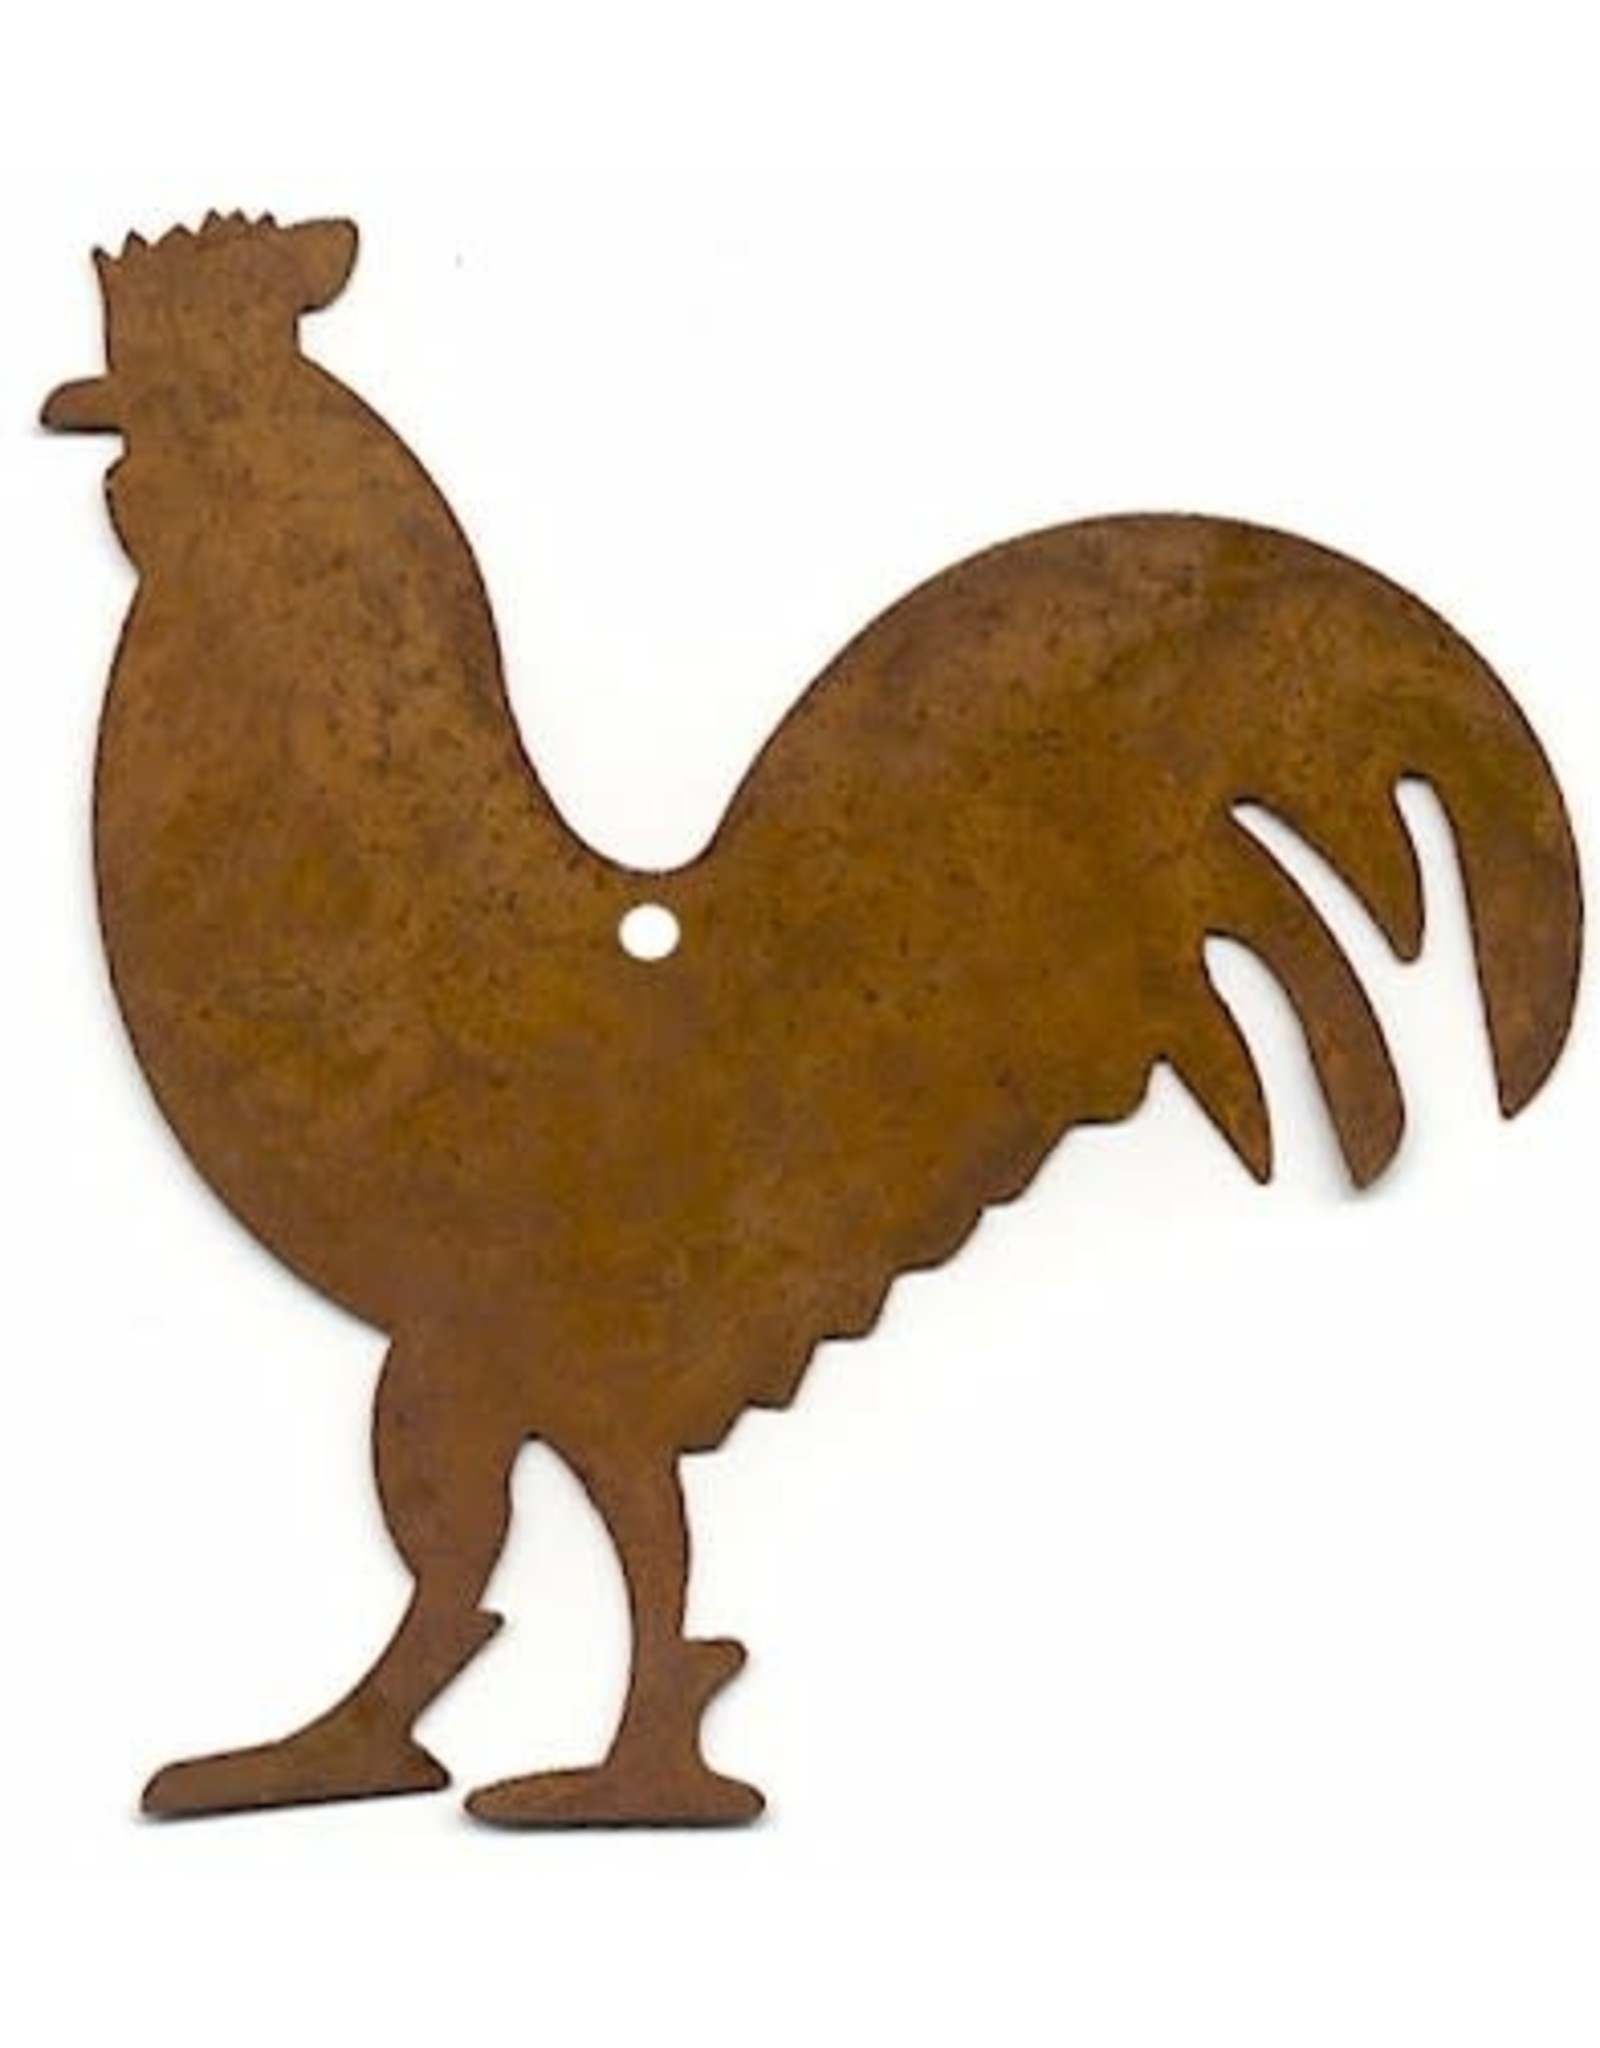 RUSTY TIN ROOSTER 3 5/8" (WITH HOLE)